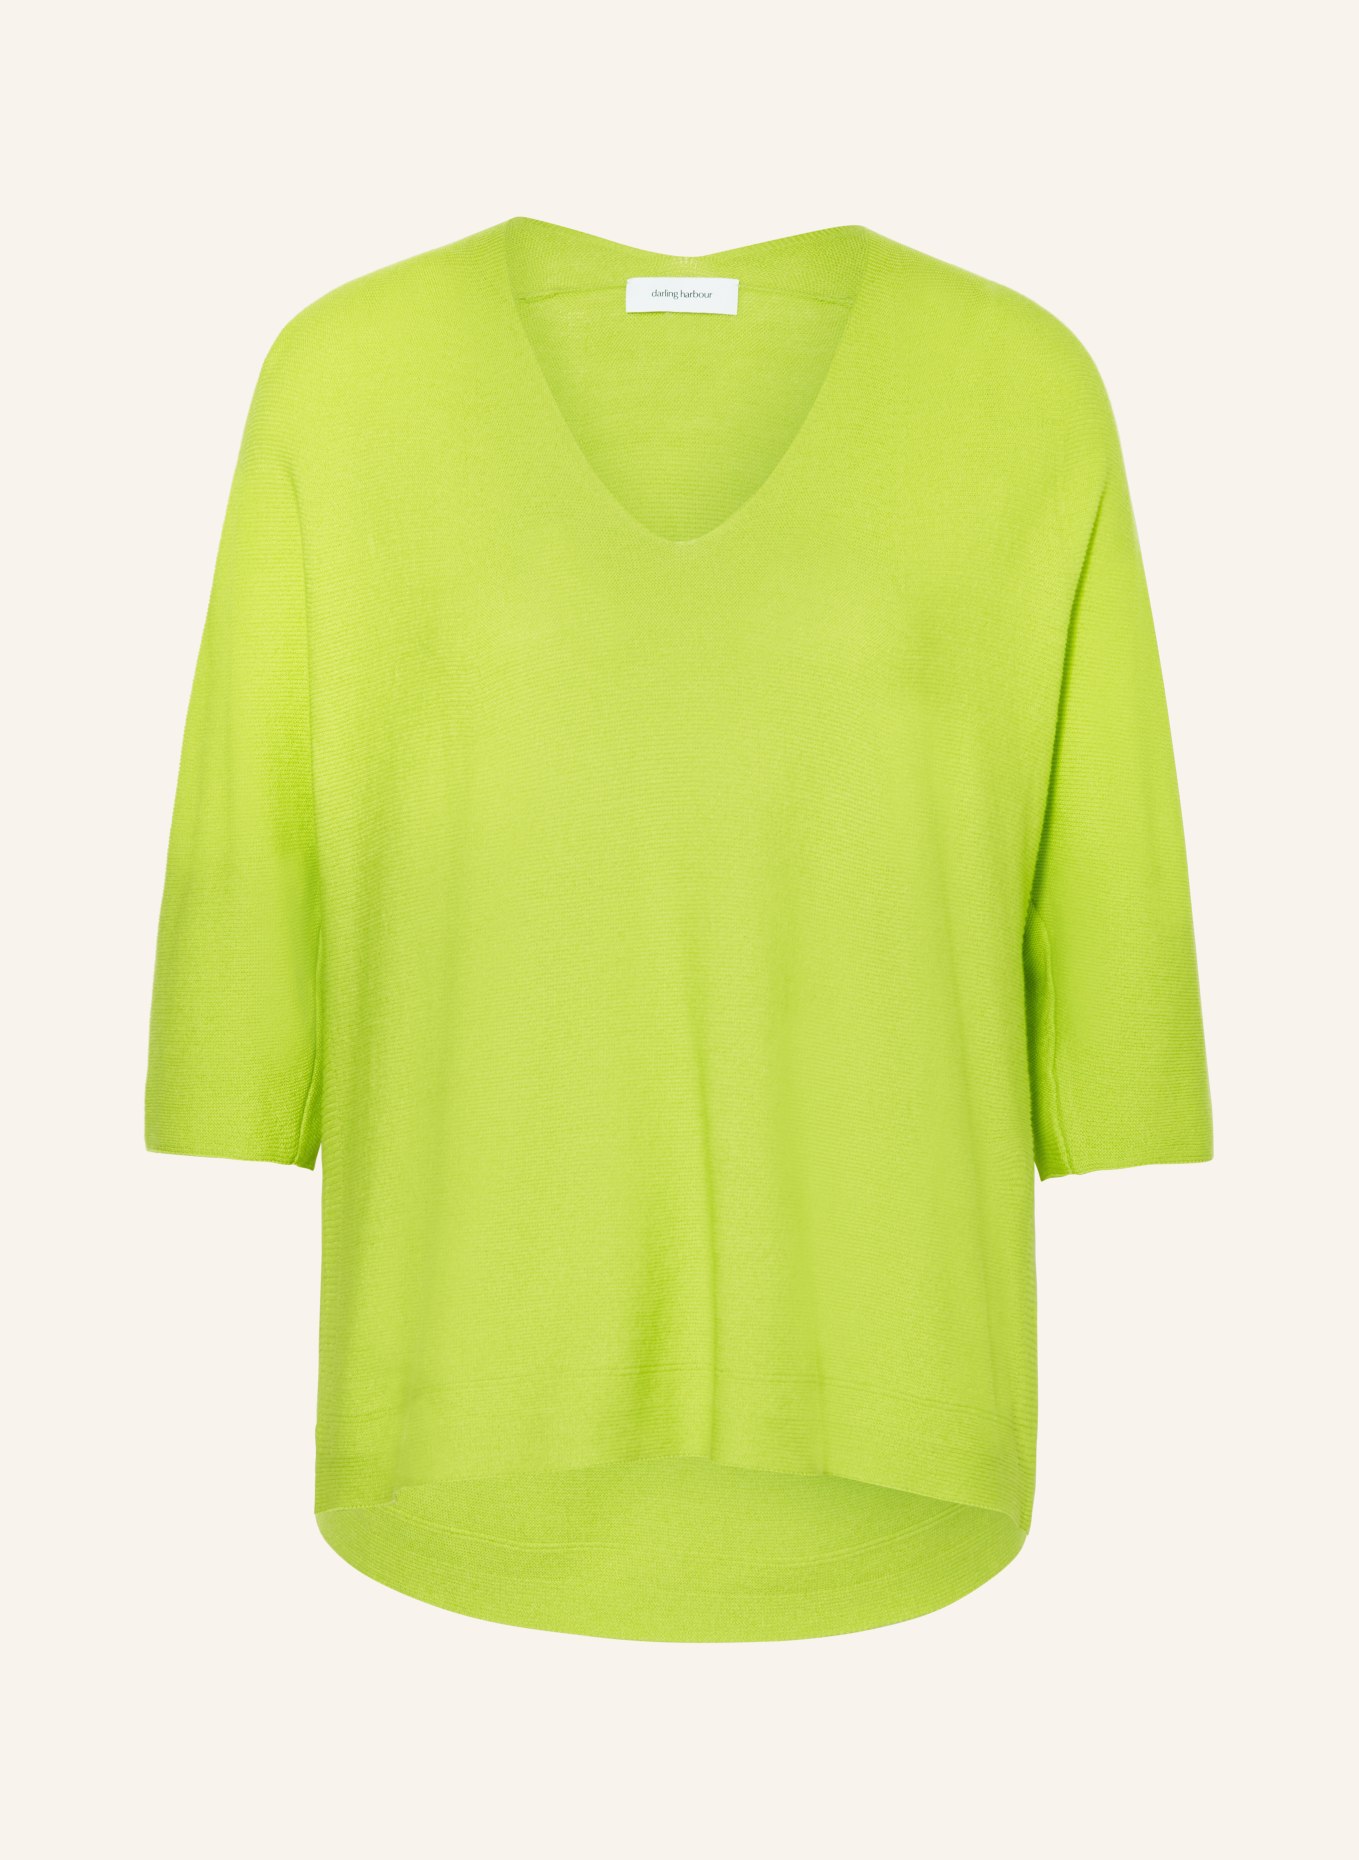 darling harbour Knit shirt with 3/4 sleeves, Color: LIMETTENGRUEN (Image 1)